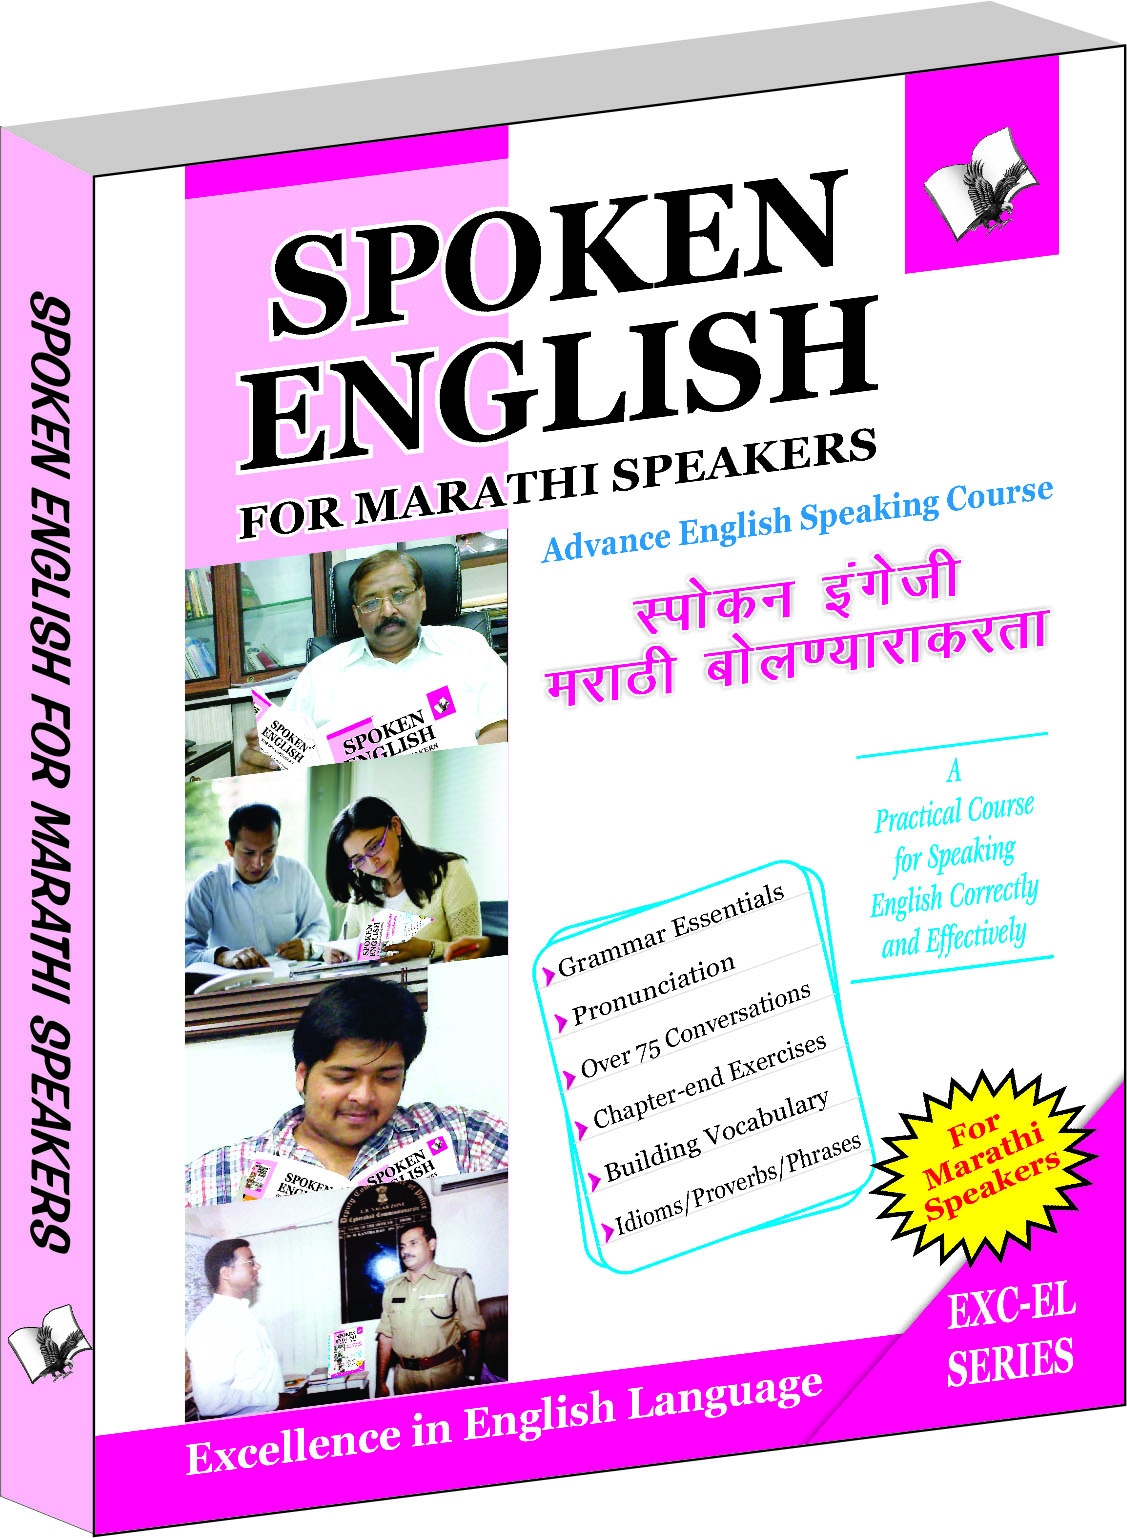 Spoken English For Marathi Speakers-How to convey your ideas in English at home, market & business for Marathi speakers